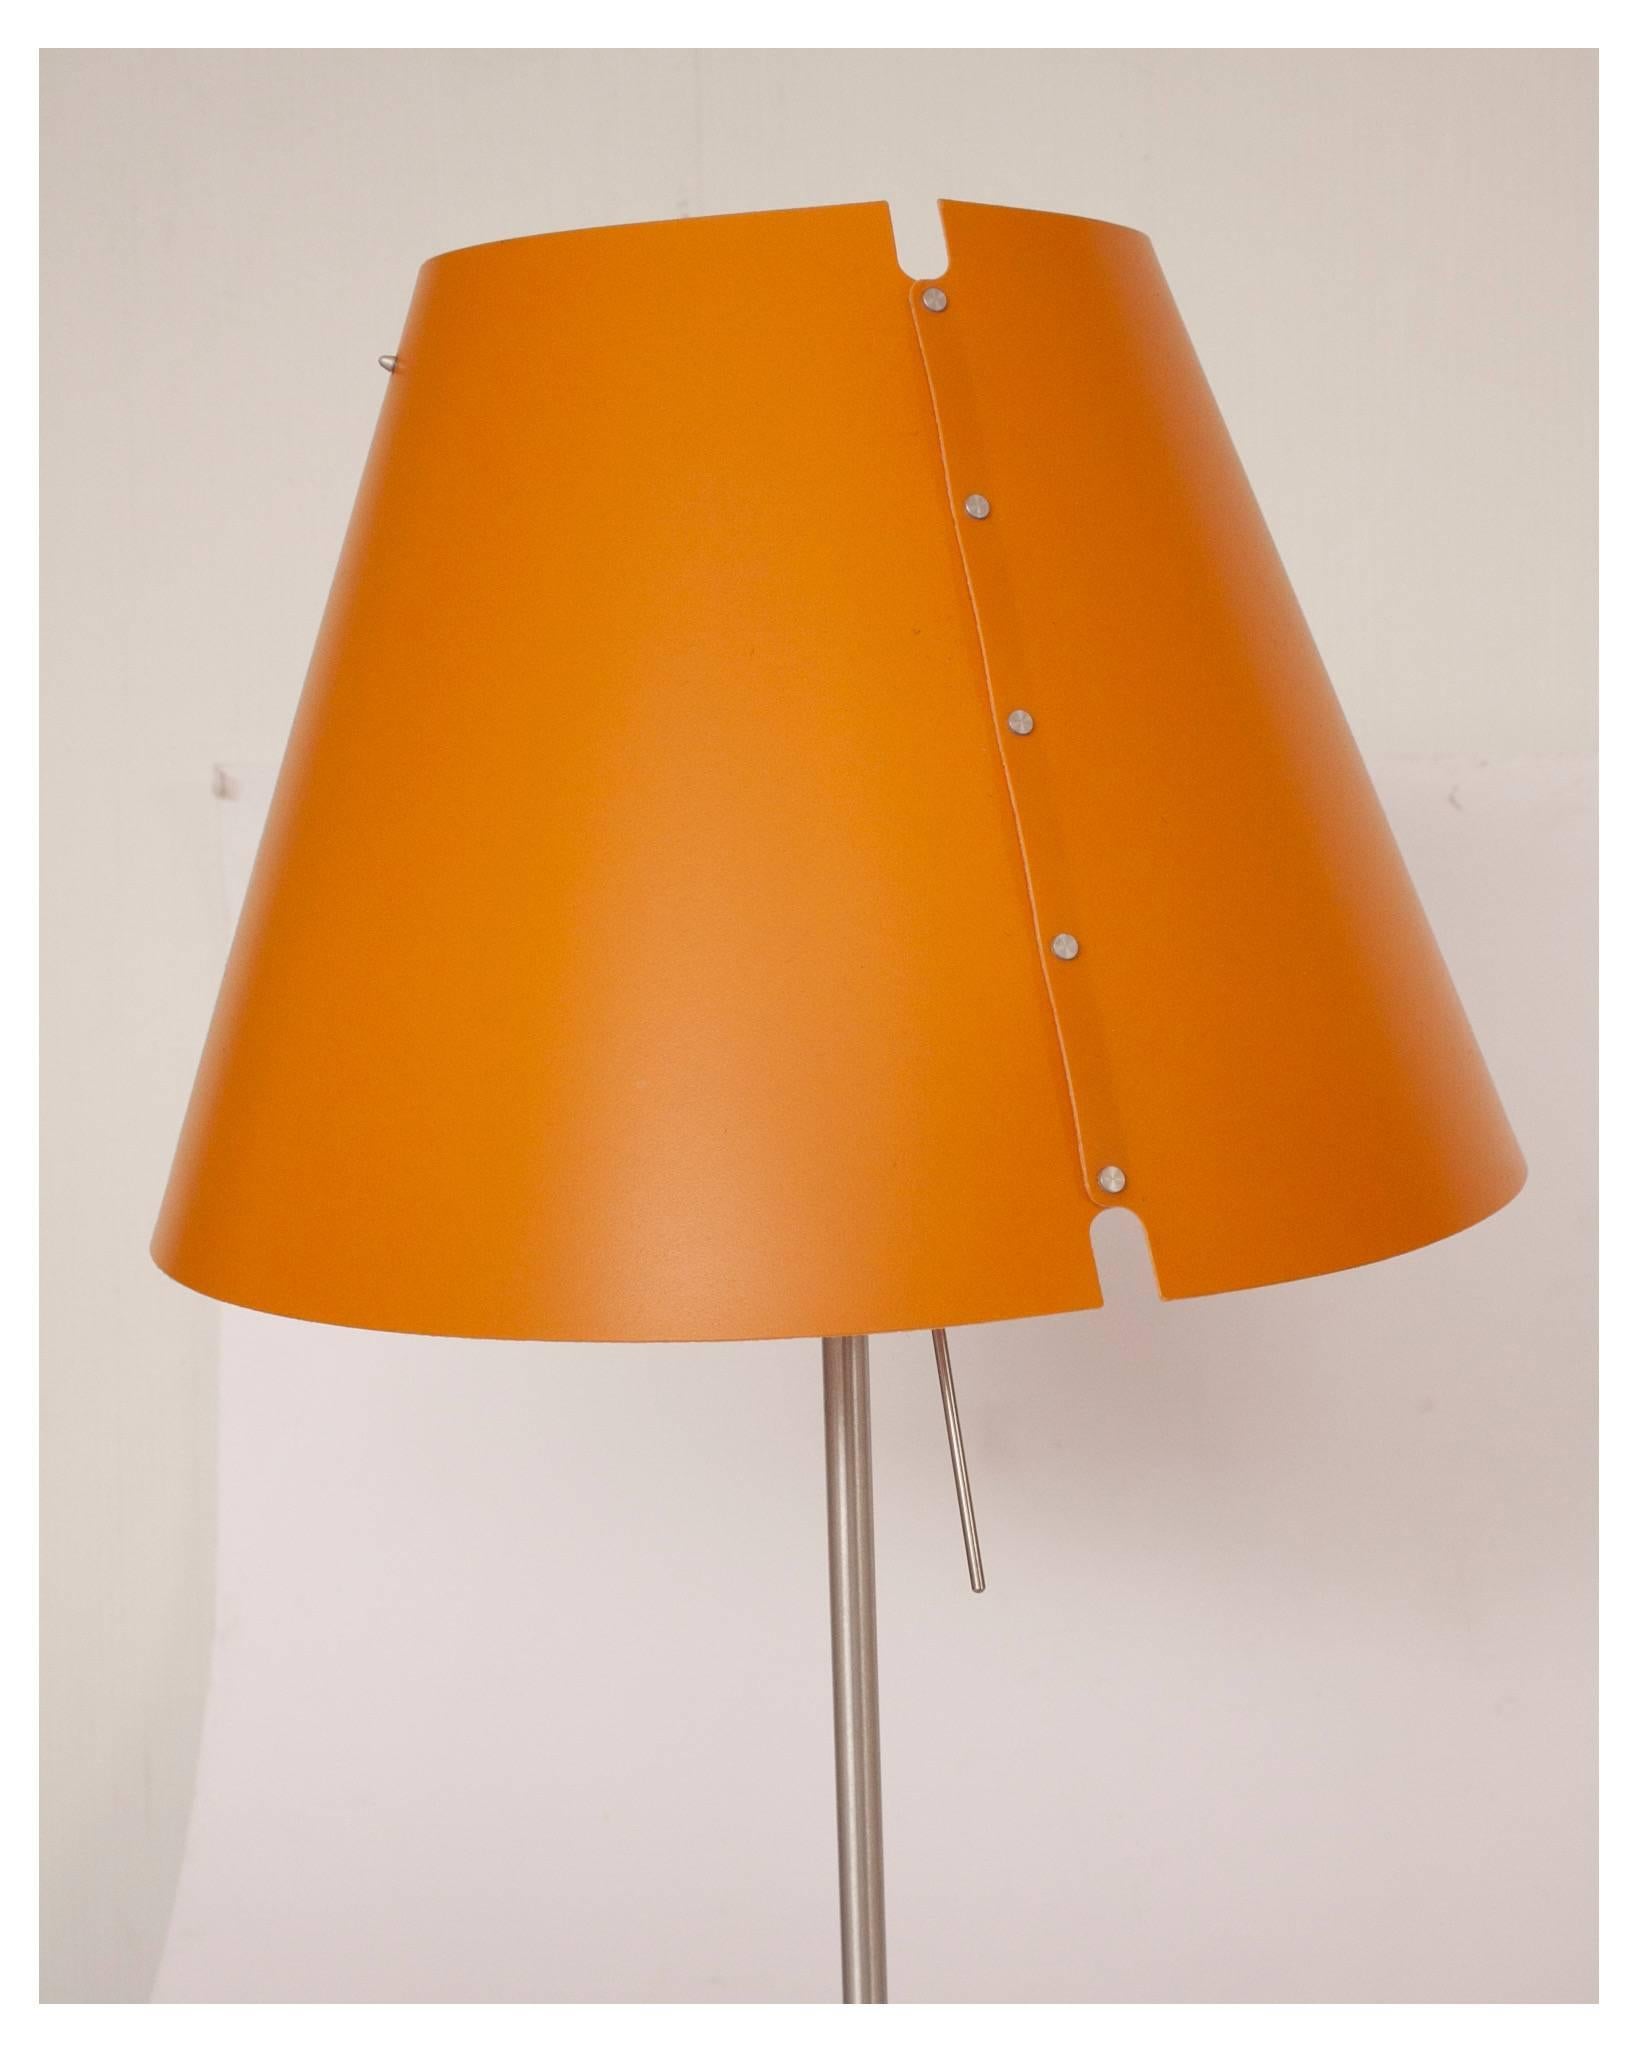 Mid-Century Modern Midcentury Table Lamp Designed by Paolo Rizzatto